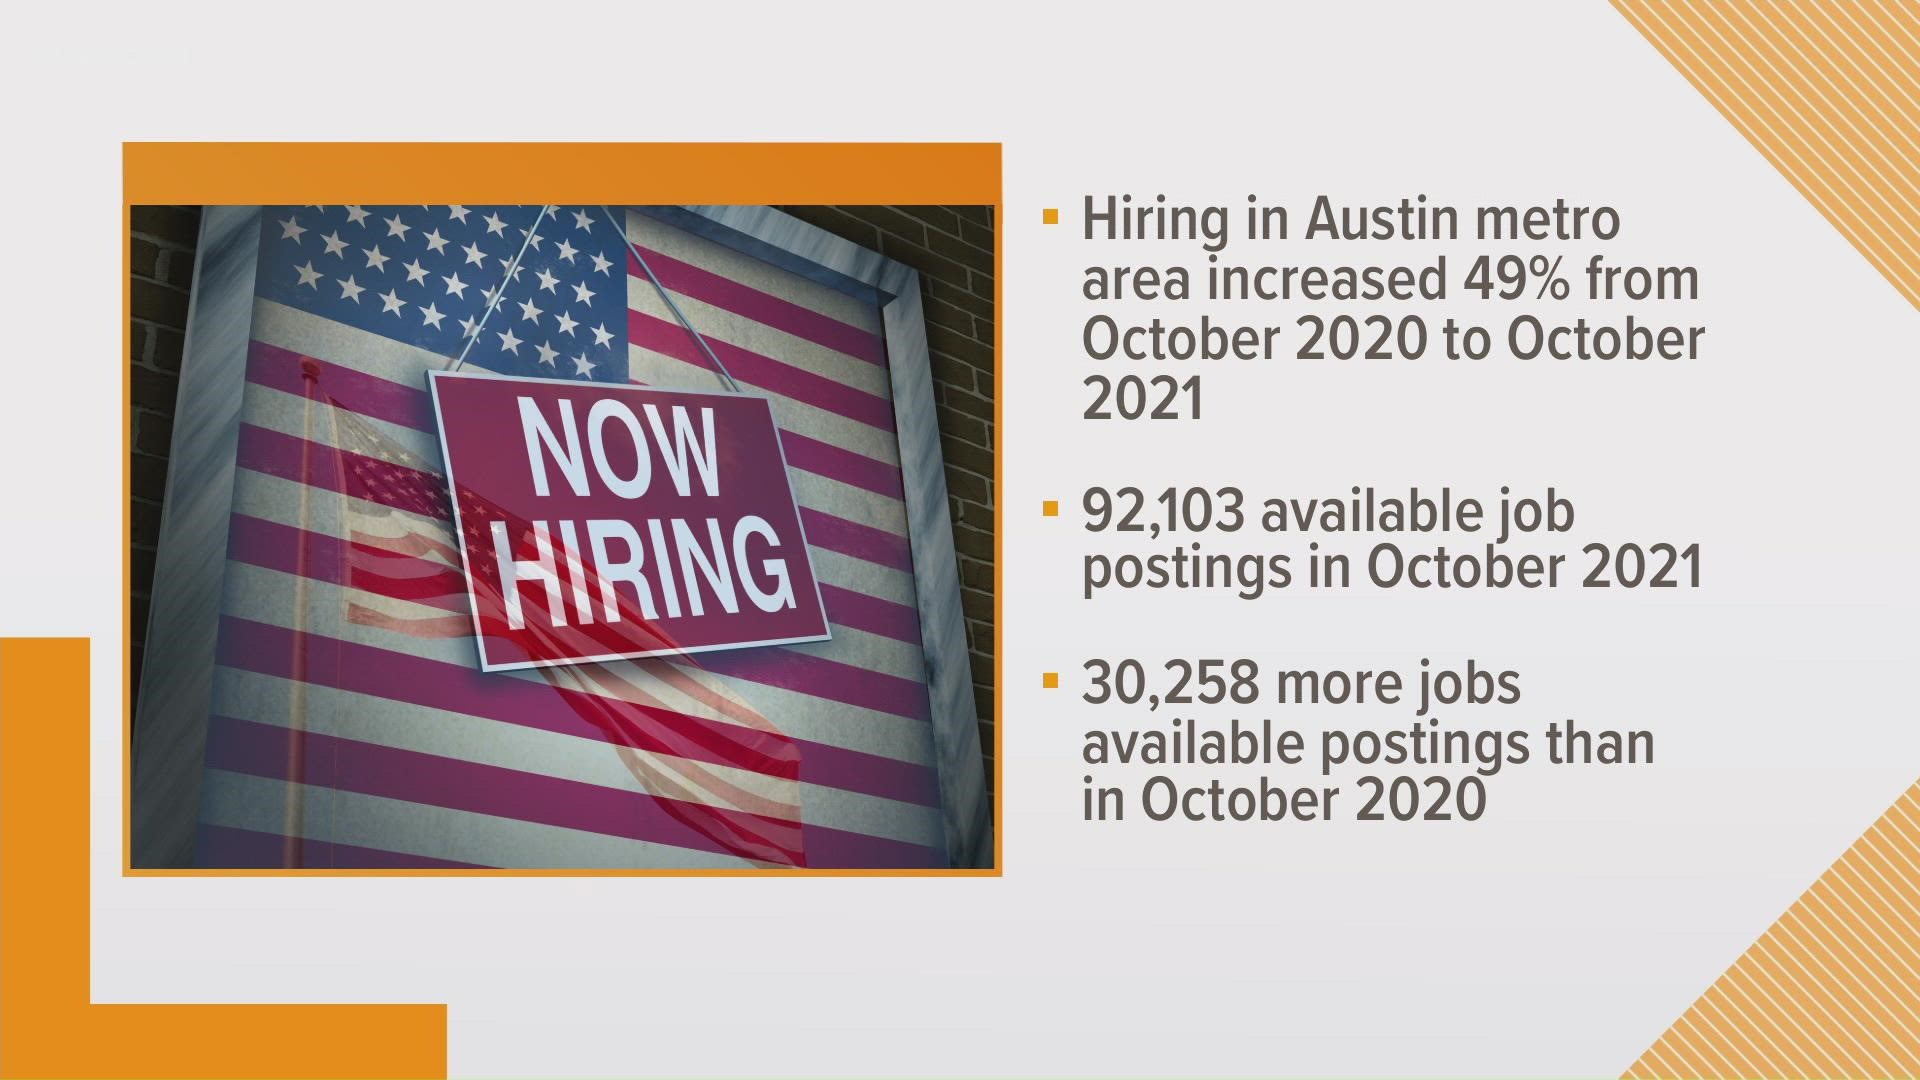 According to a report from the Austin Chamber of Commerce, hiring from October 2020 to October 2021 increased 49% in the Austin metro area.